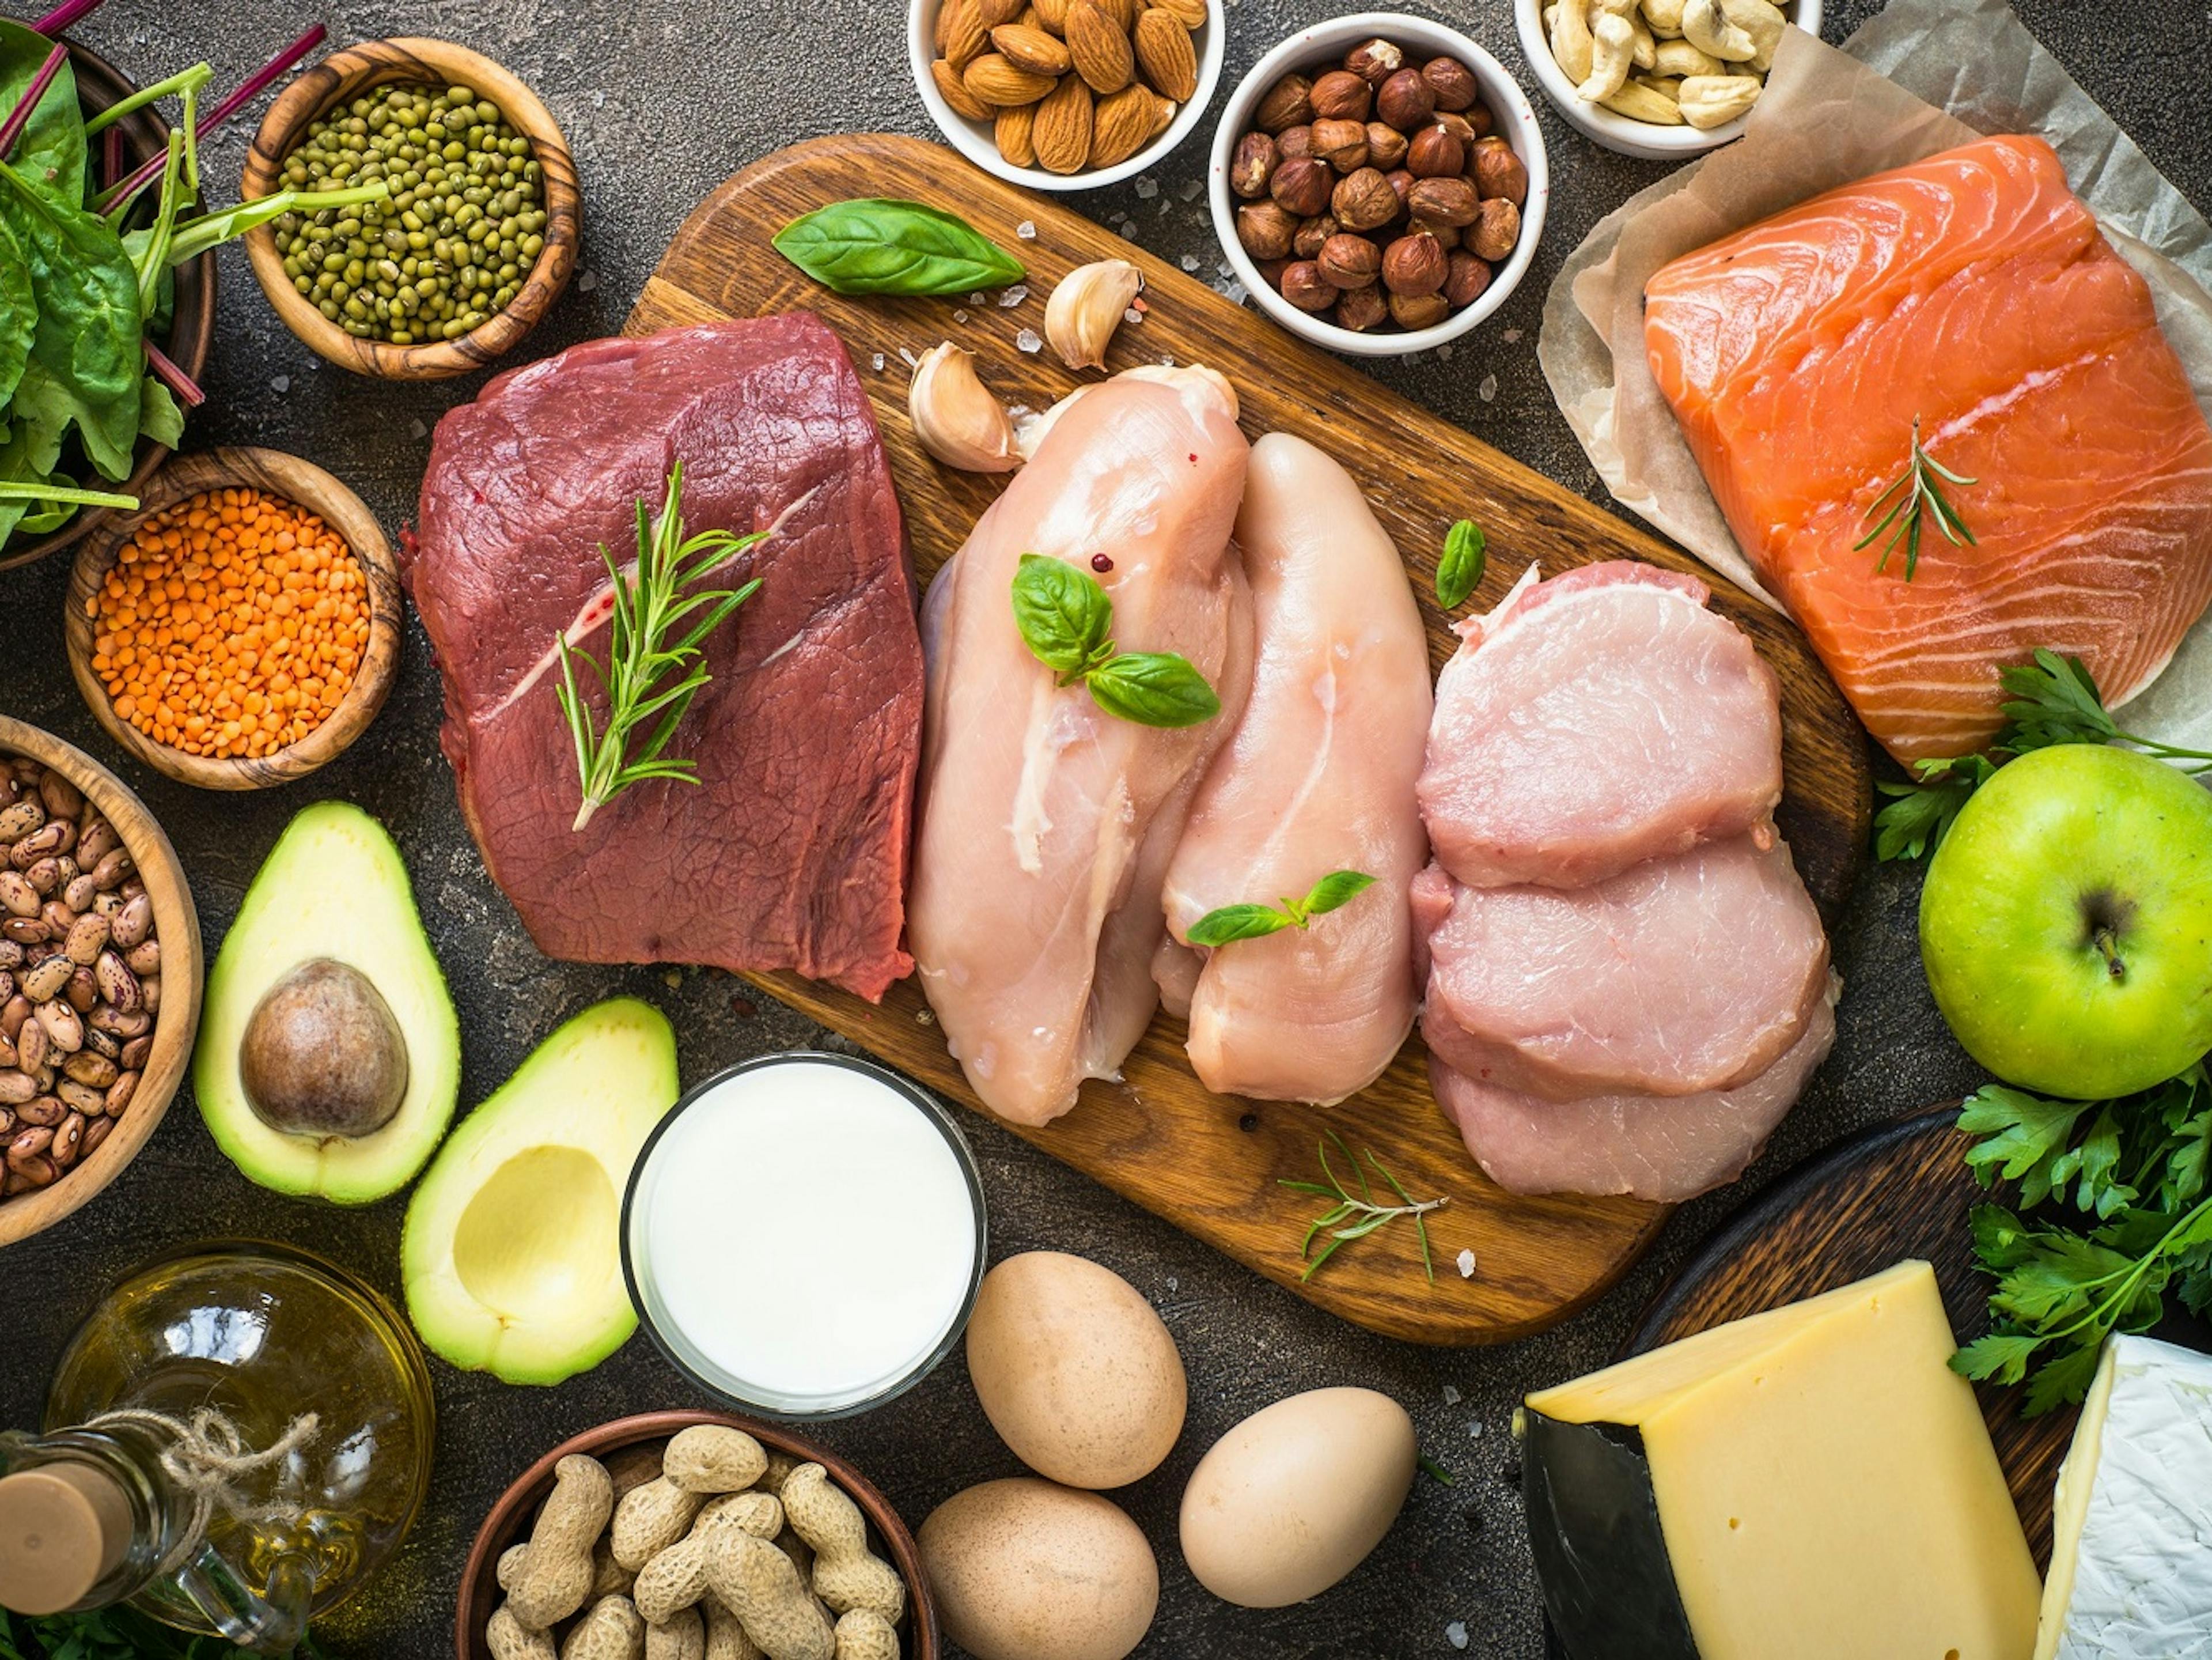 Are You Getting Enough Protein?